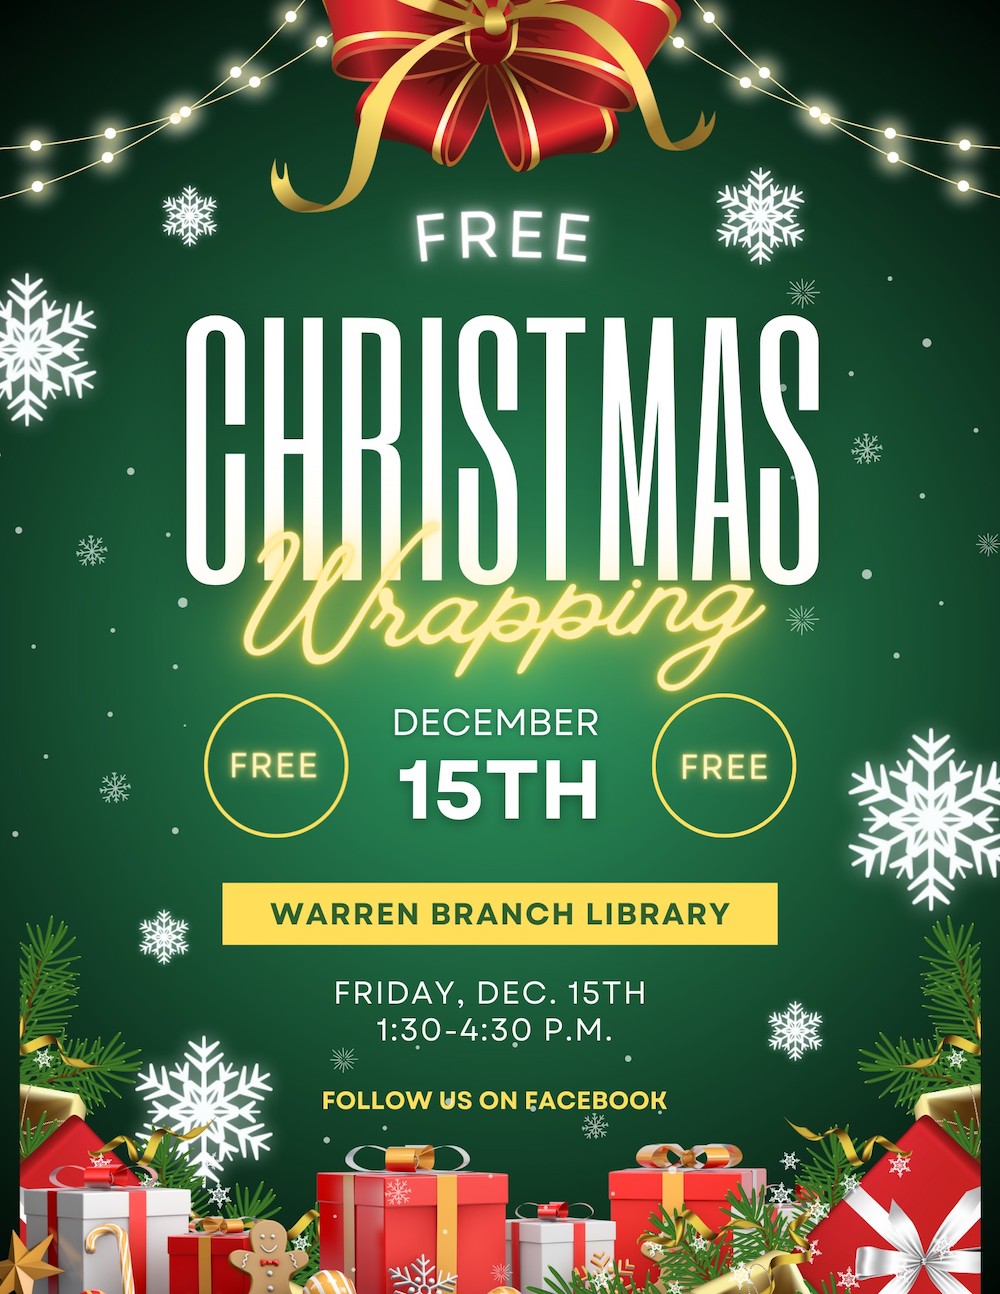 Library offering free Christmas wrapping service